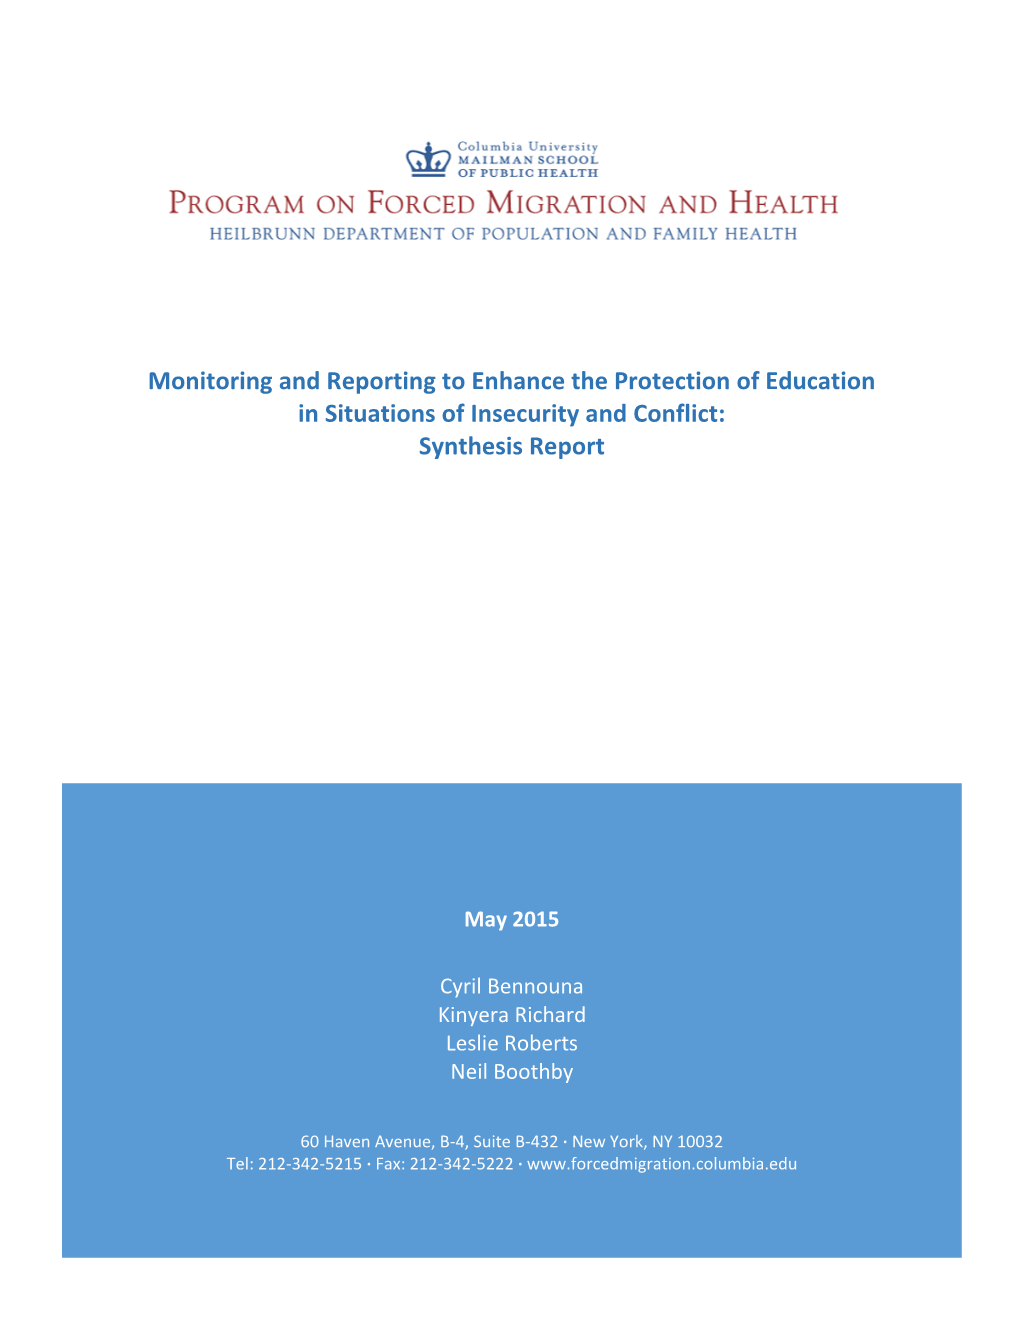 Monitoring and Reporting to Enhance the Protection of Education in Situations of Insecurity and Conflict: Synthesis Report